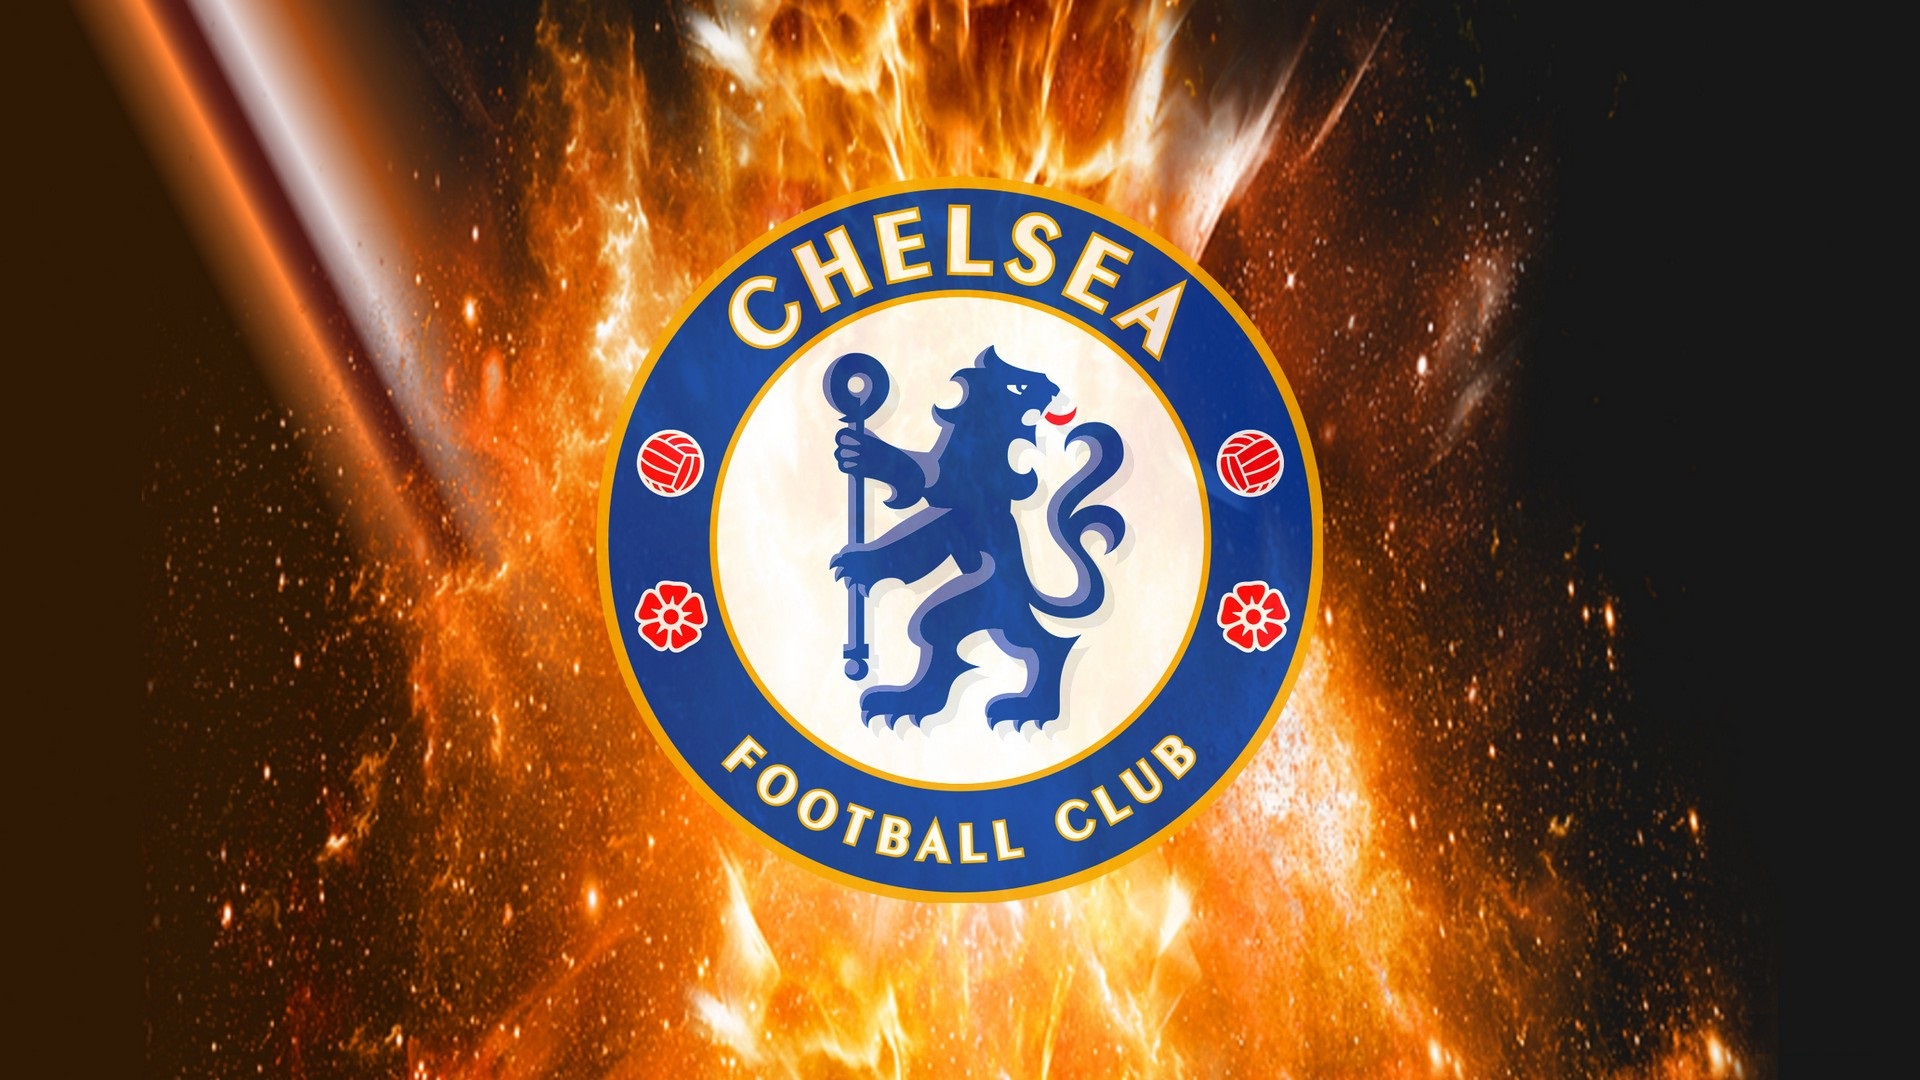 Windows Wallpaper Chelsea Logo With high-resolution 1920X1080 pixel. You can use this wallpaper for your Desktop Computers, Mac Screensavers, Windows Backgrounds, iPhone Wallpapers, Tablet or Android Lock screen and another Mobile device